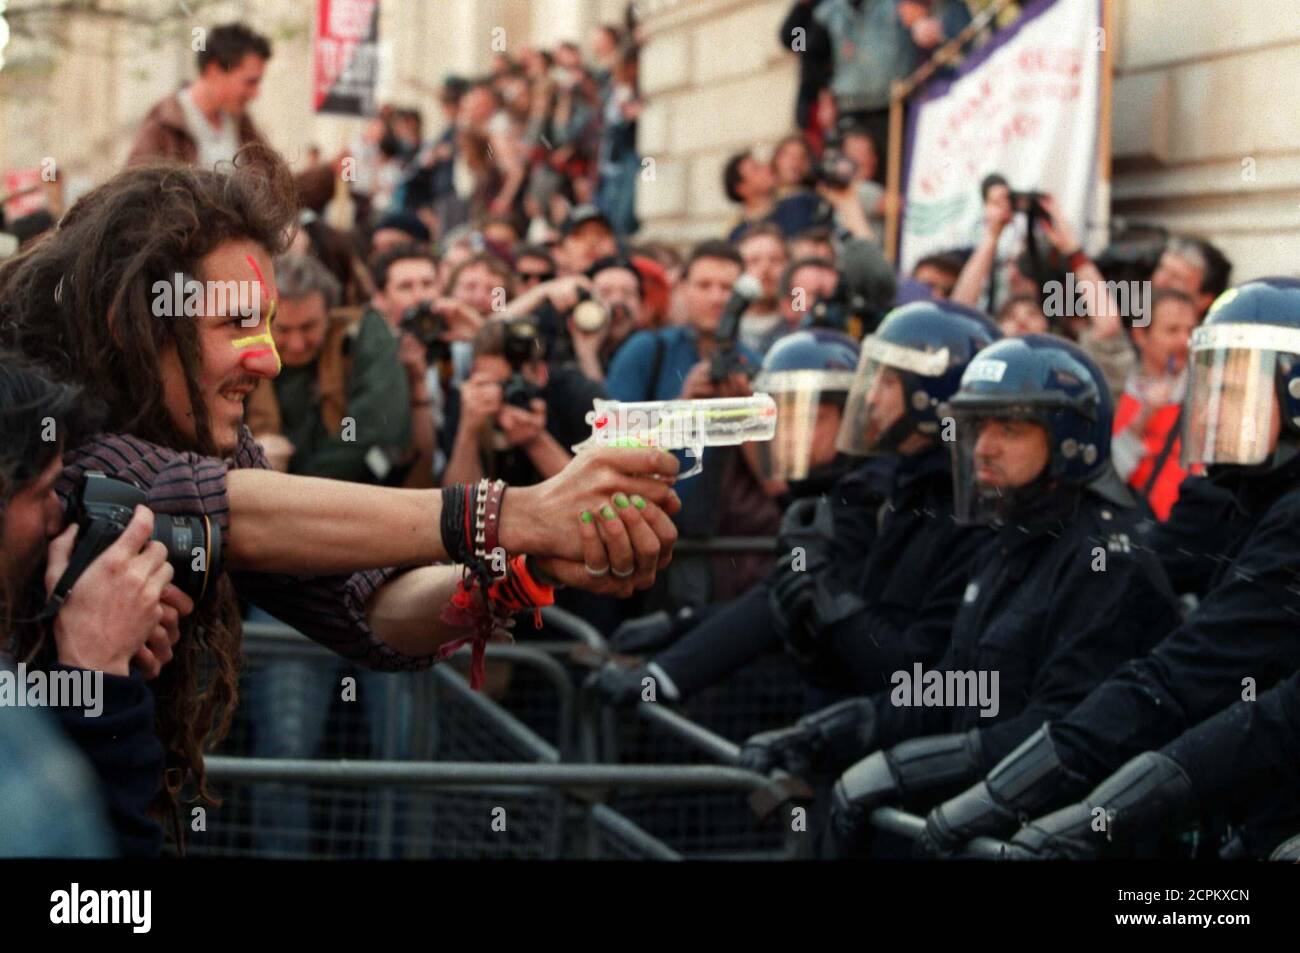 An environmental protester points a water pistol at London policemen forming a line at the gates of Prime Minister John Major's Downing Street residence April 12. Police later charged at the marchers on horseback after bottles and a smoke grenade were thrown.  BRITAIN MARCH Stock Photo